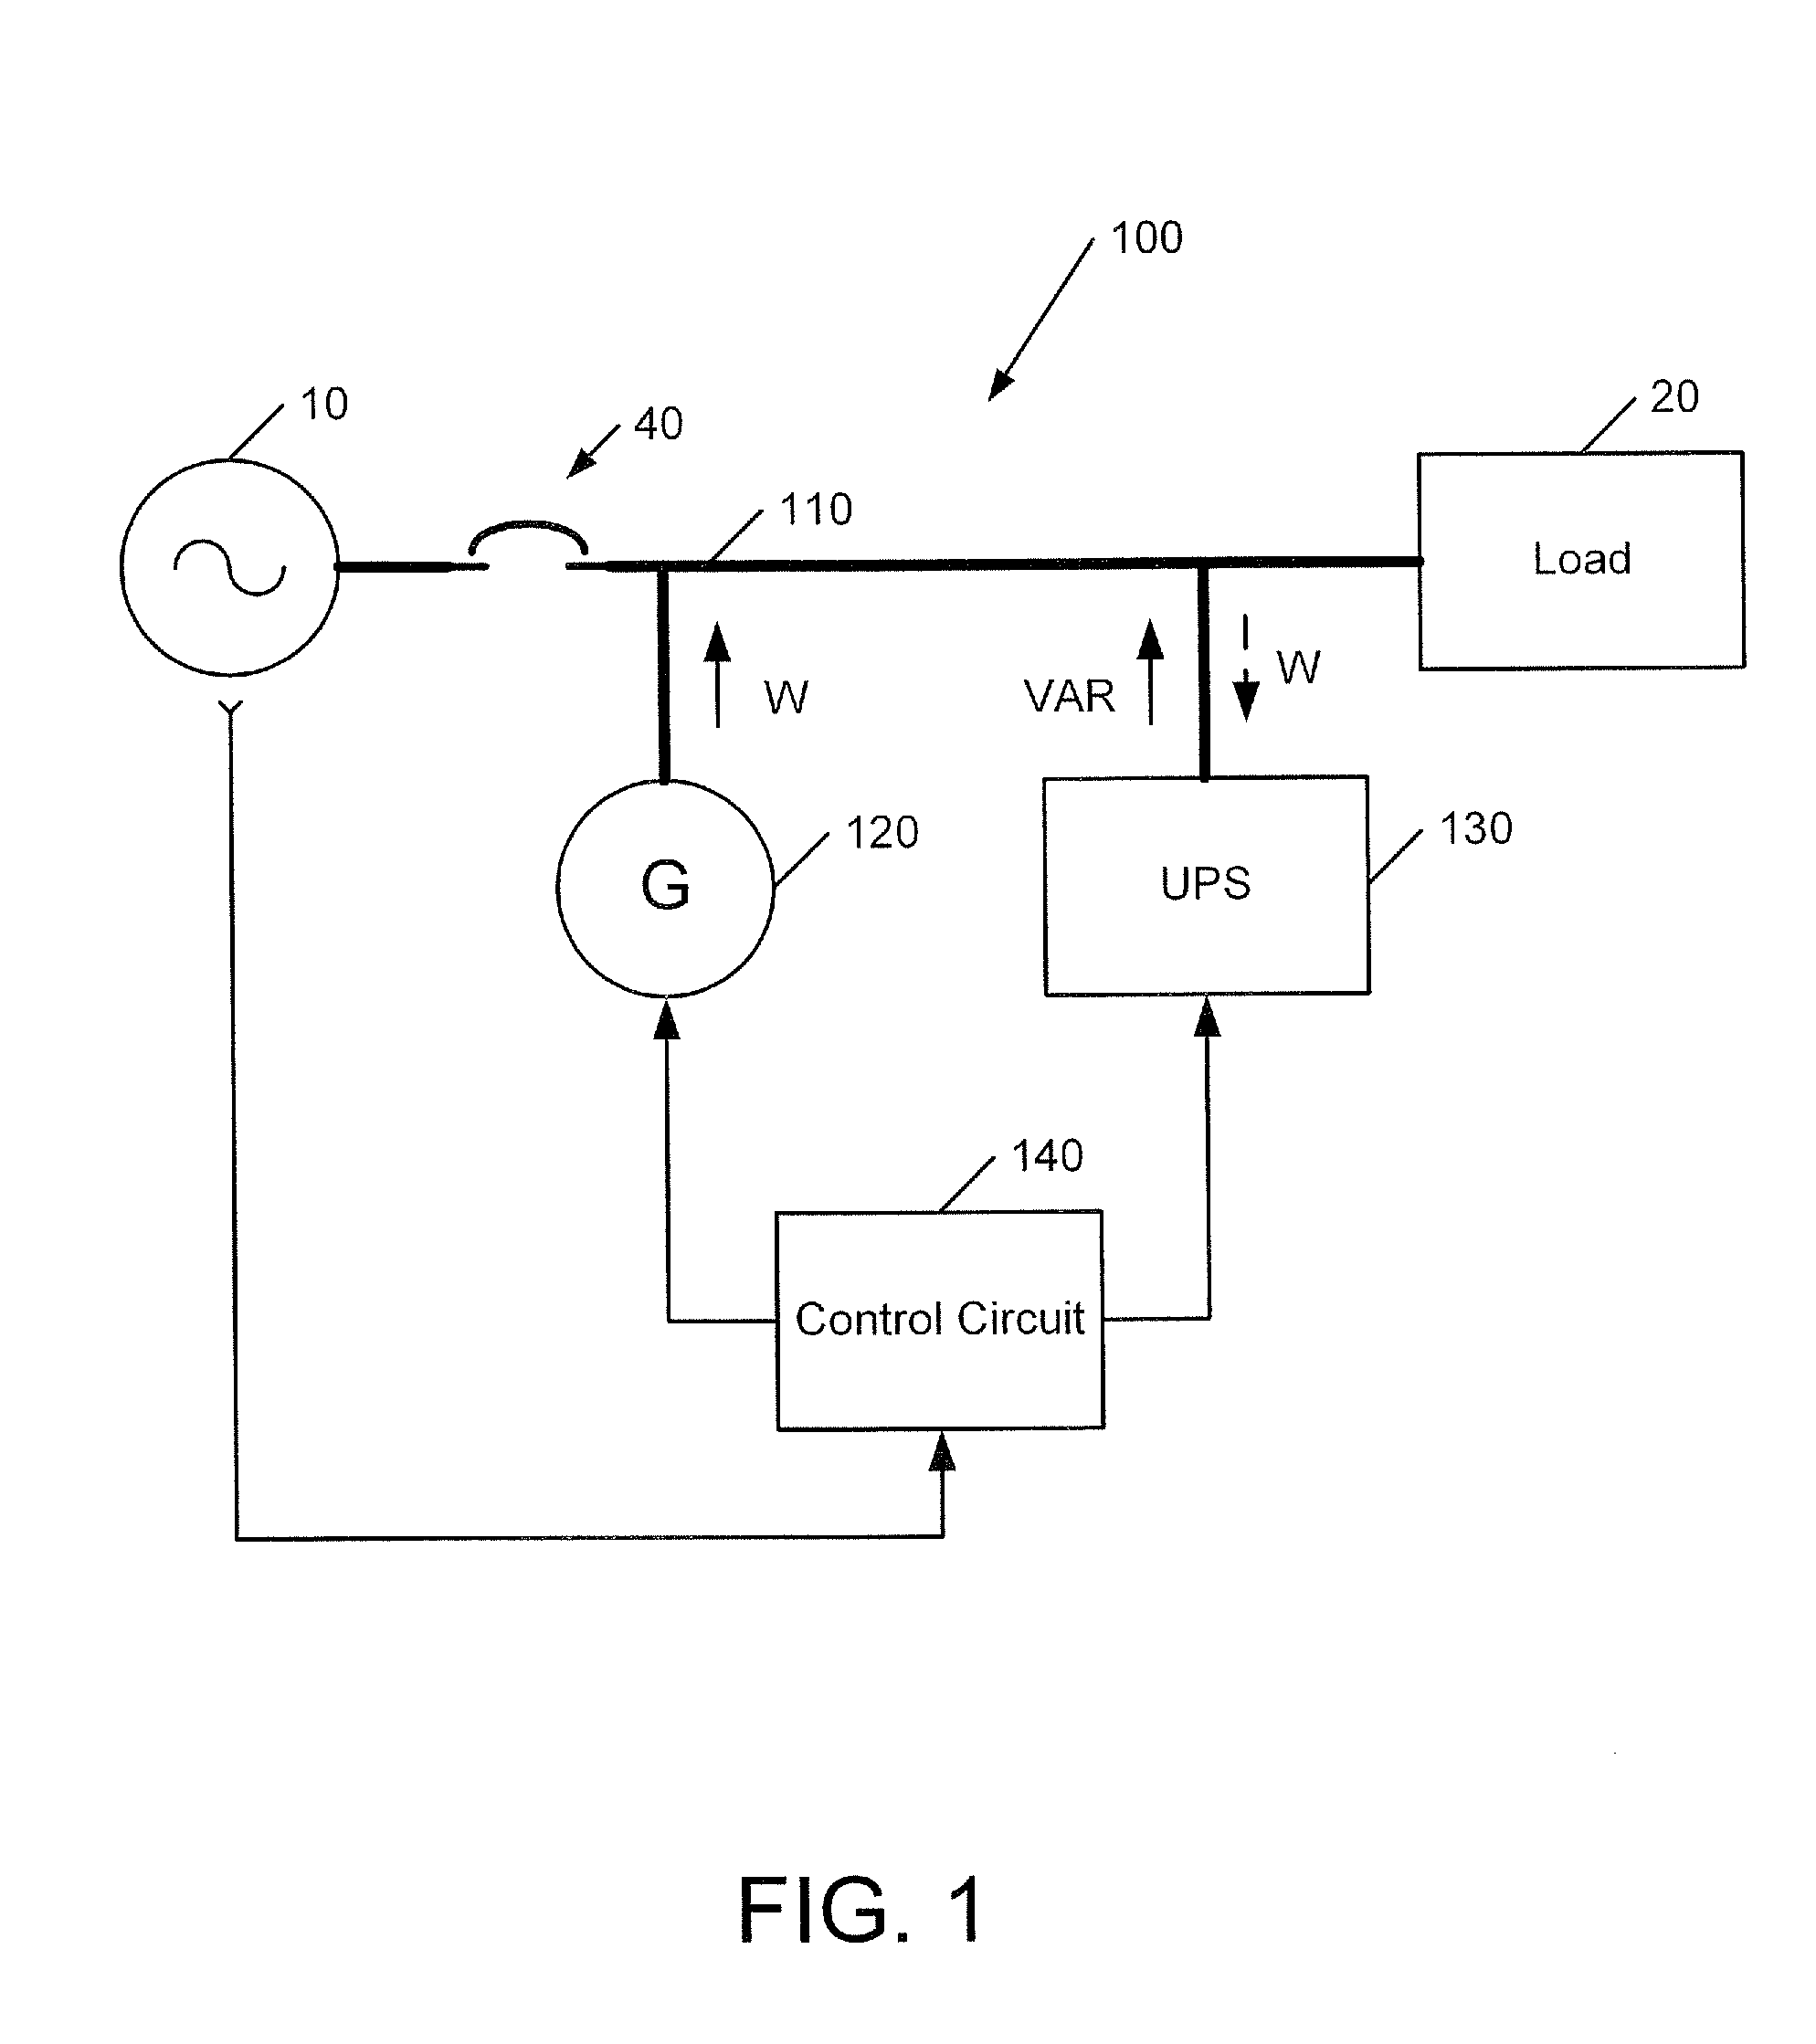 Power Systems and Methods Using an Induction Generator in Cooperation with an Uninterruptible Power Supply